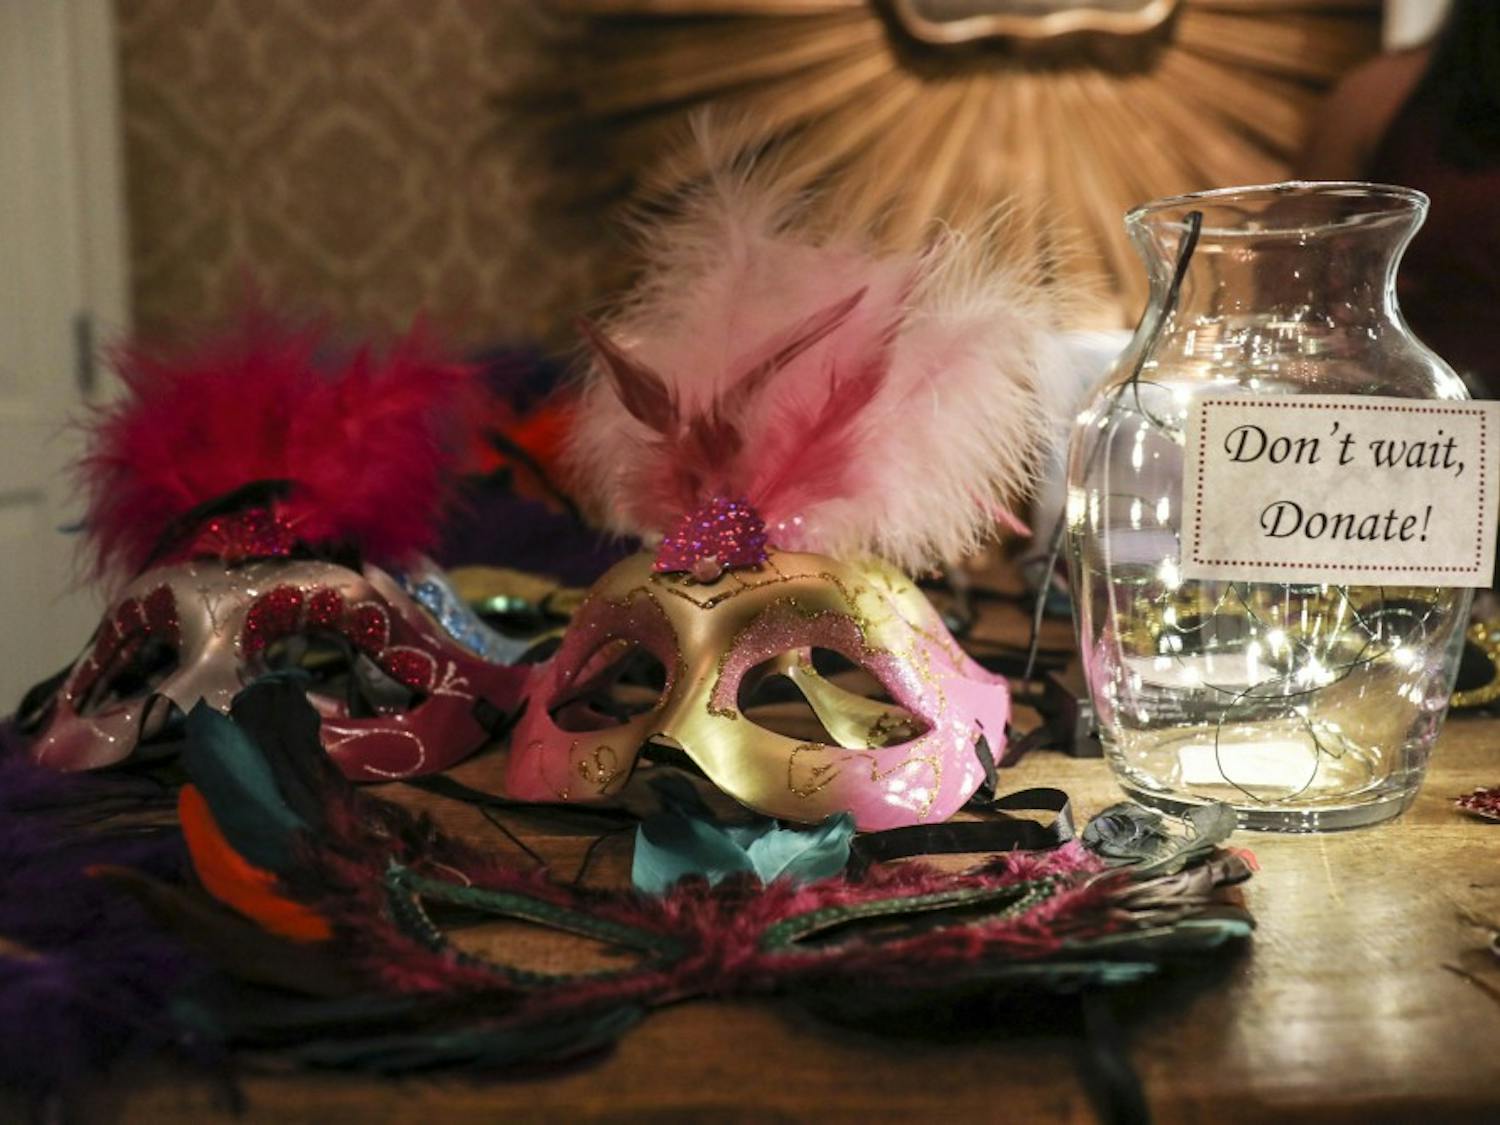 Masquerade masks lay on a table with a donation jar on Saturday evening at Casa Esencia in Old Town. Proceeds benefited One Hope Centro de Vida Health Center and Albuquerque Opportunity Center Clinic.
